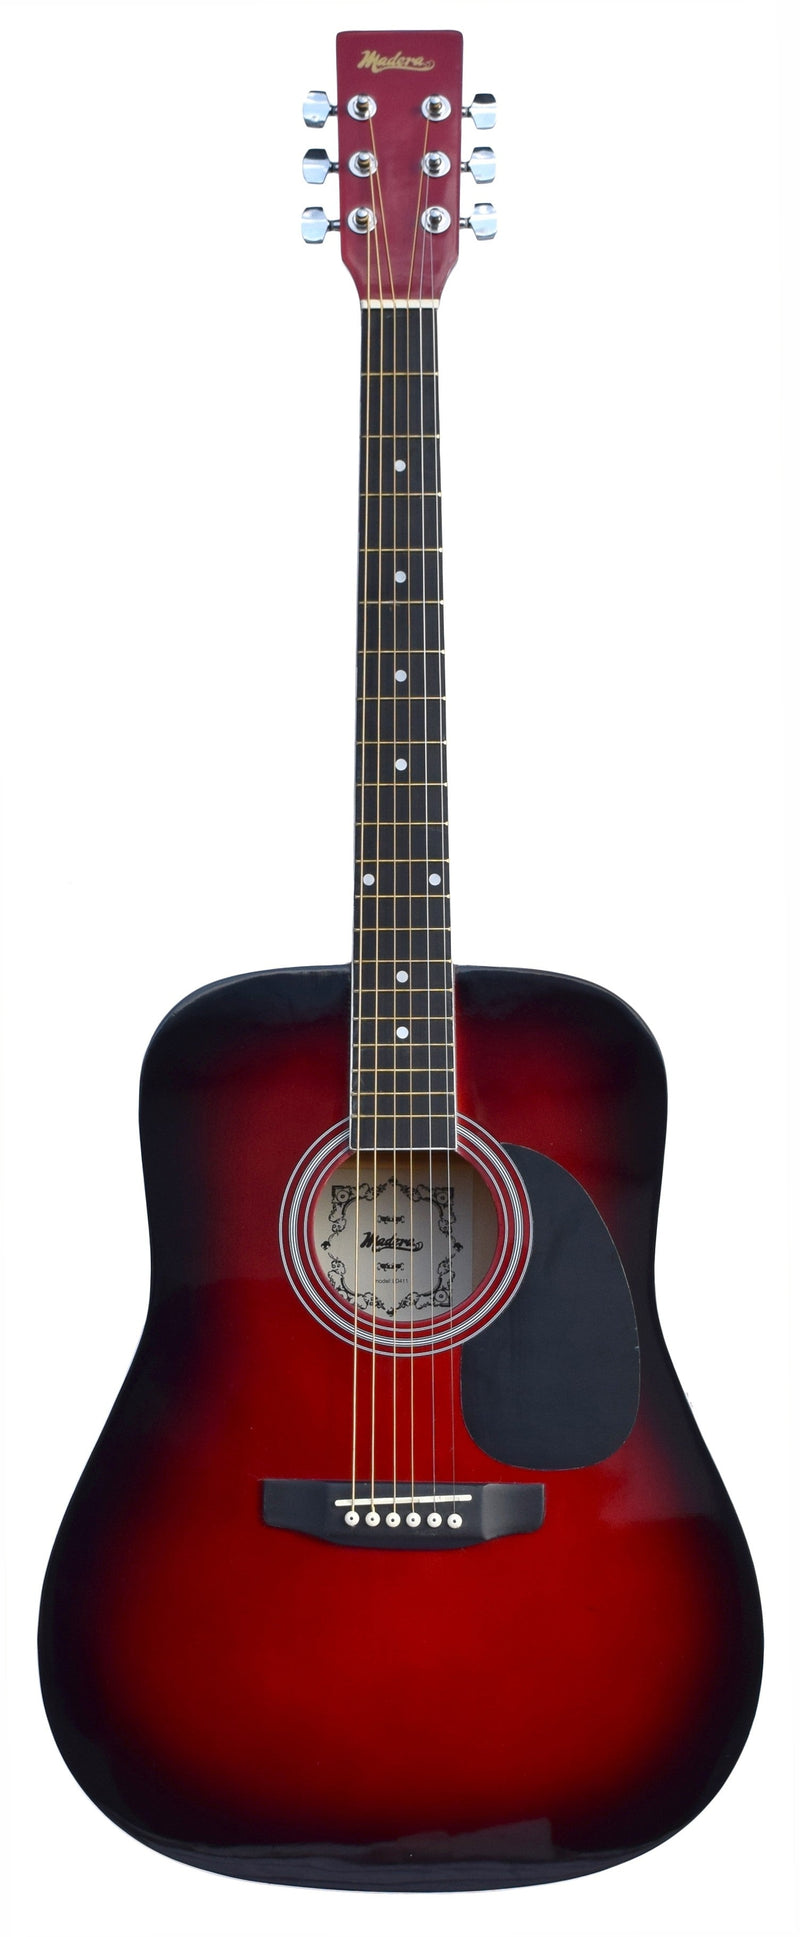 Madera LD411 Acoustic Full Size Guitar Red Burst Madera Instrument for sale canada